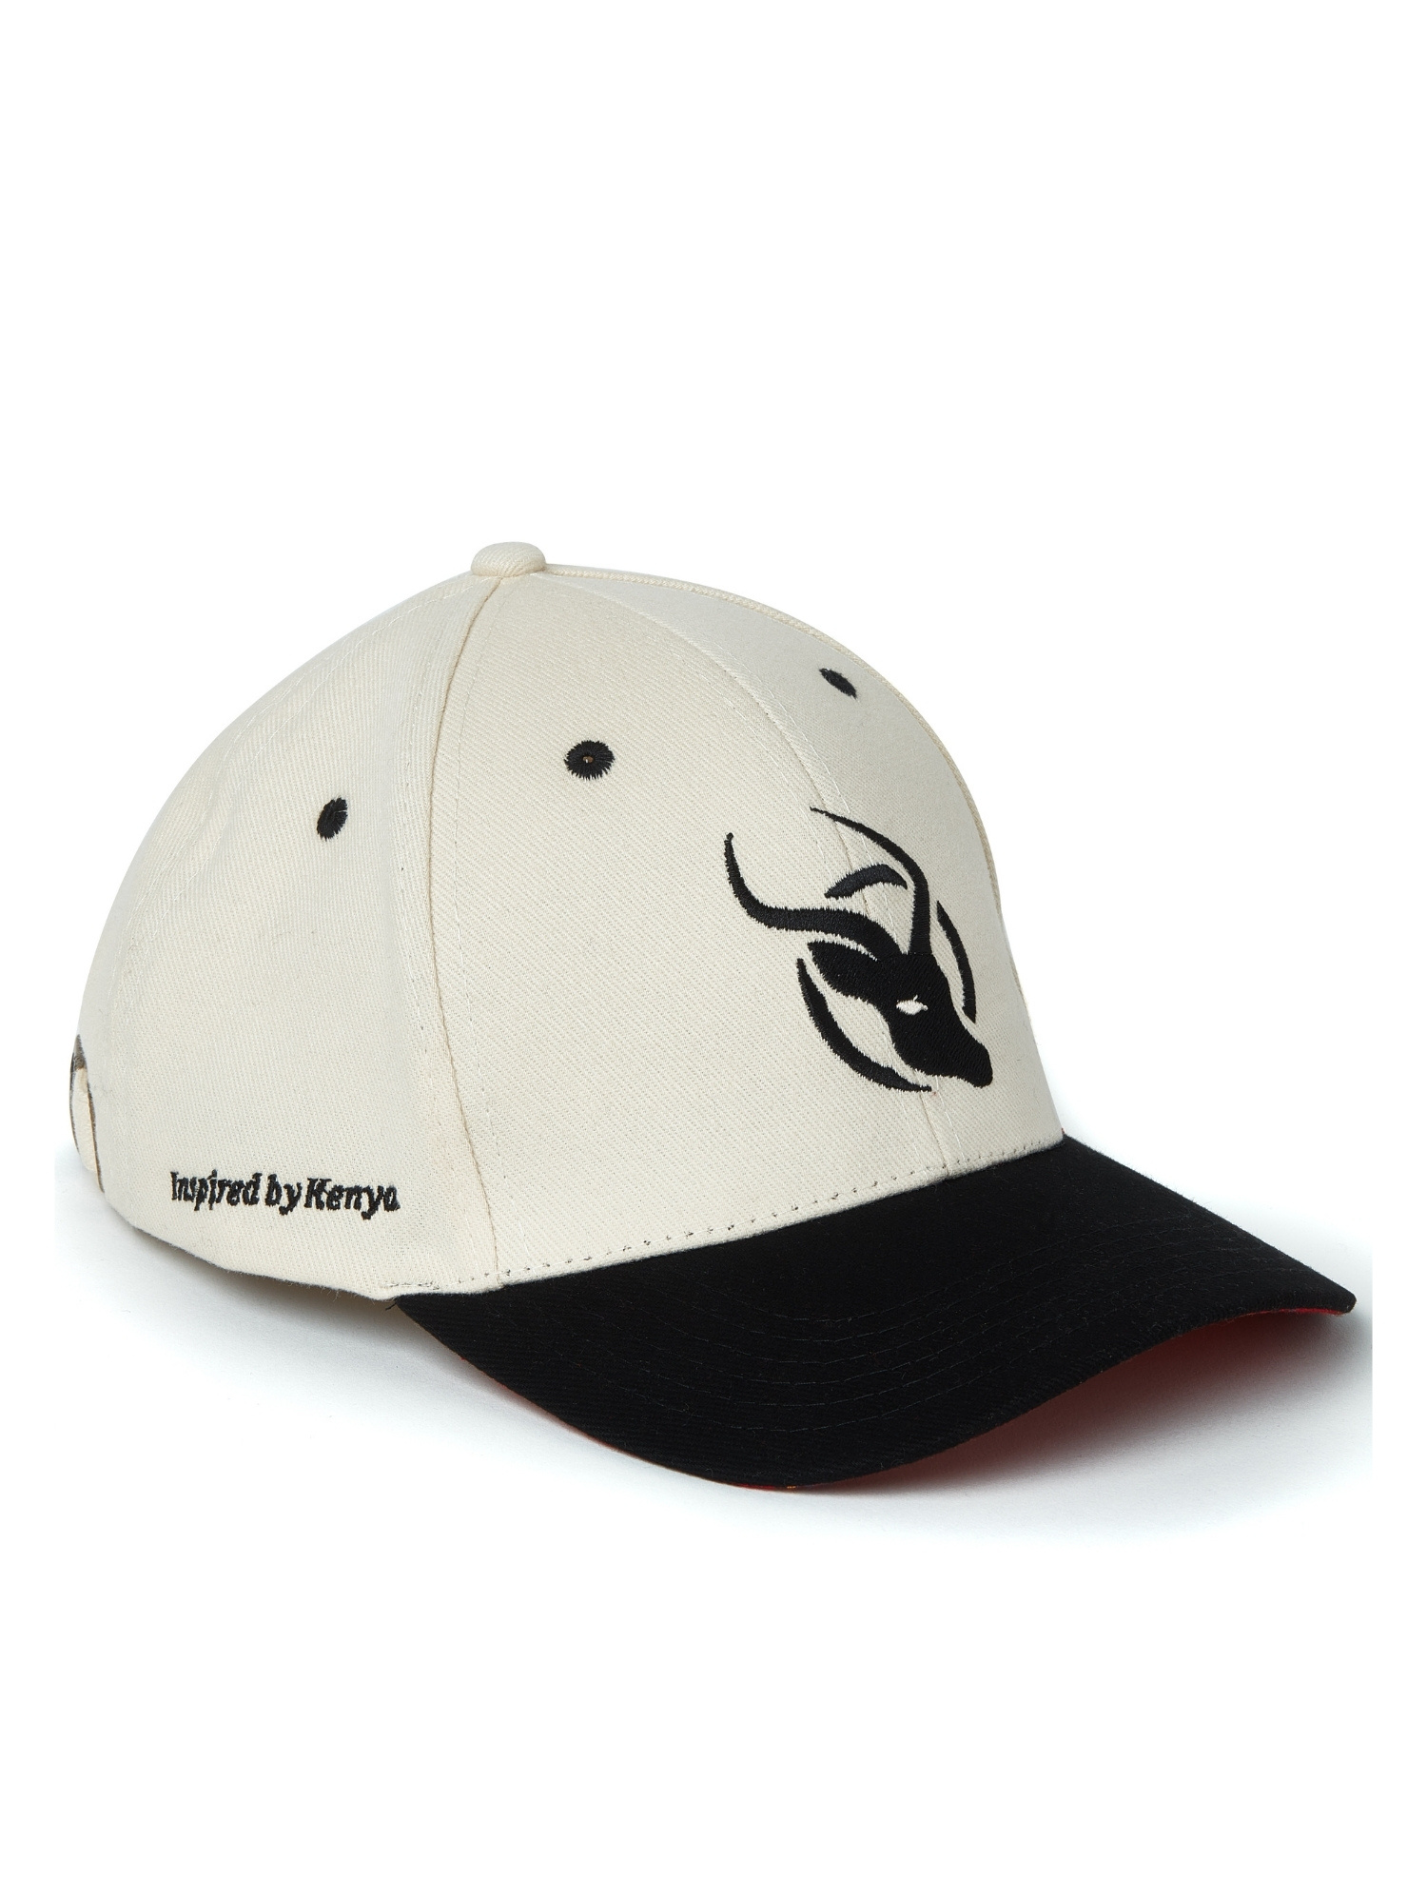 Safari Beige Cotton Cap - Maasai-Red striped Kenyan Kikoy fabric detailing under the peak - Traditional baseball style cap made from durable washed cotton twill - Signature impala head logo embroidery and embossed buckle